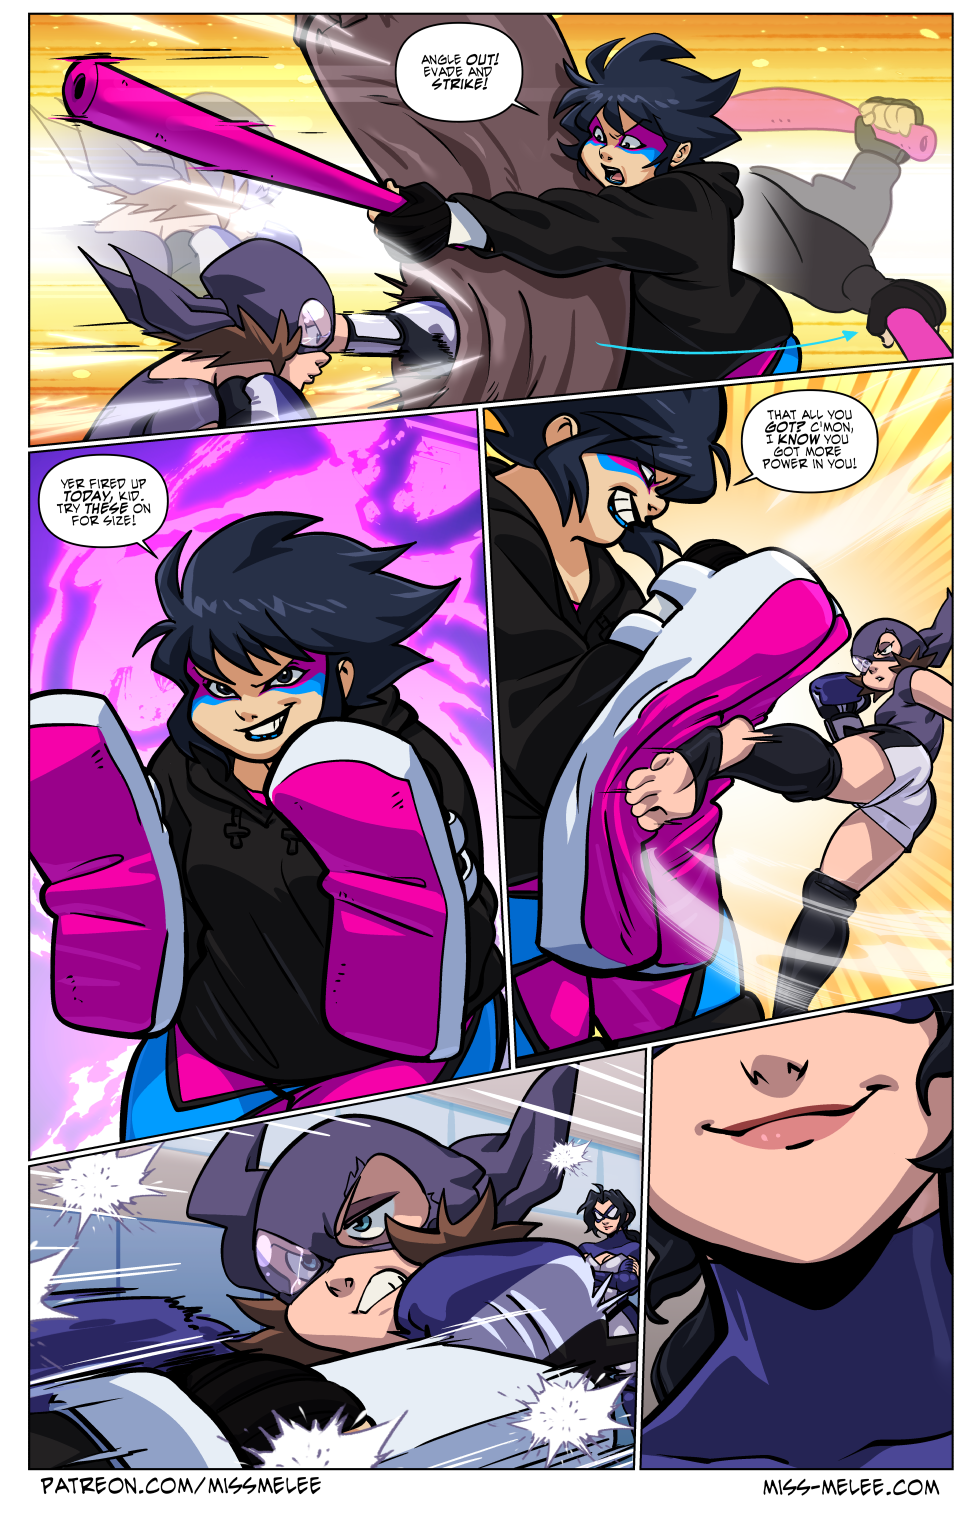 Issue 12 page 7